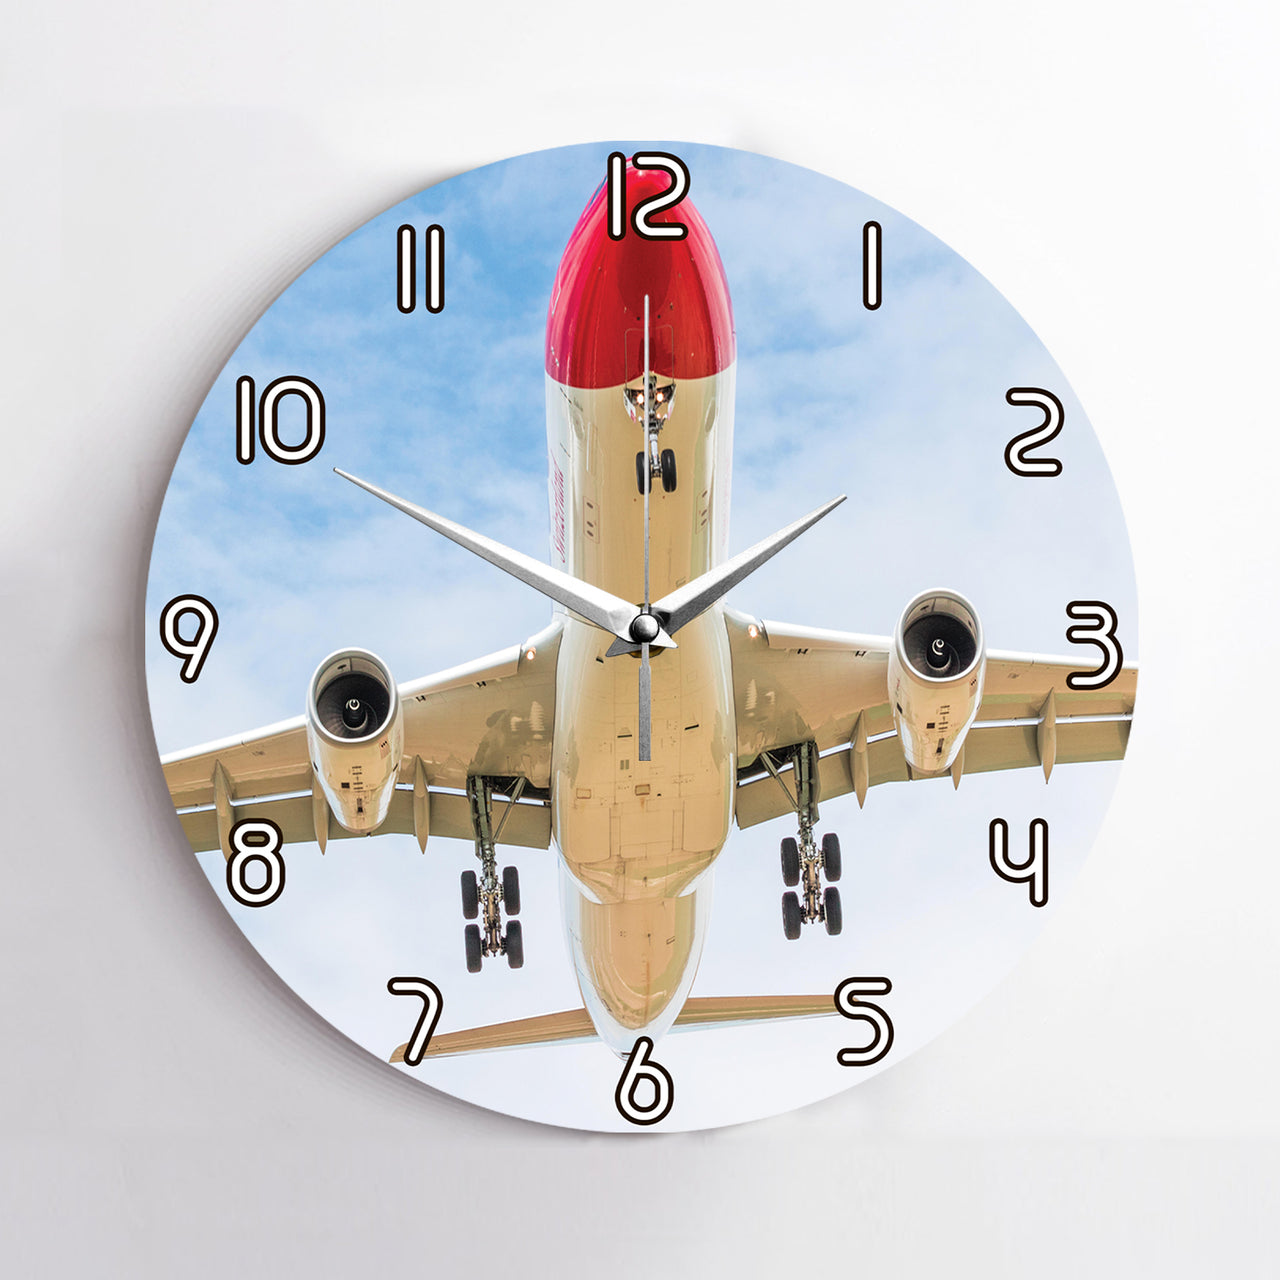 Beautiful Airbus A330 on Approach Printed Wall Clocks